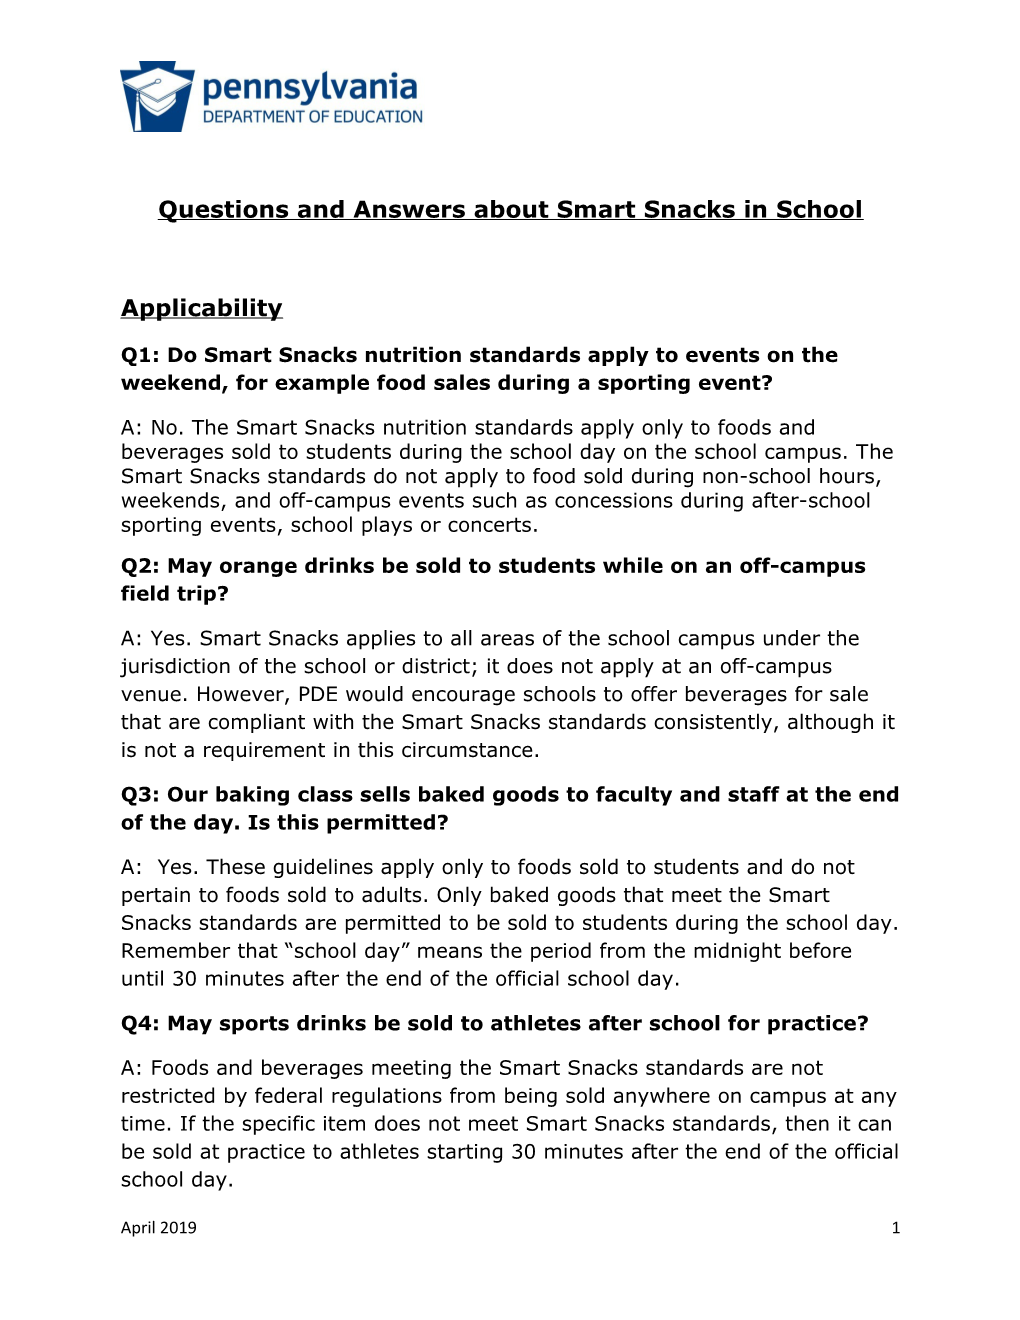 Questions and Answers About Smart Snacks in School